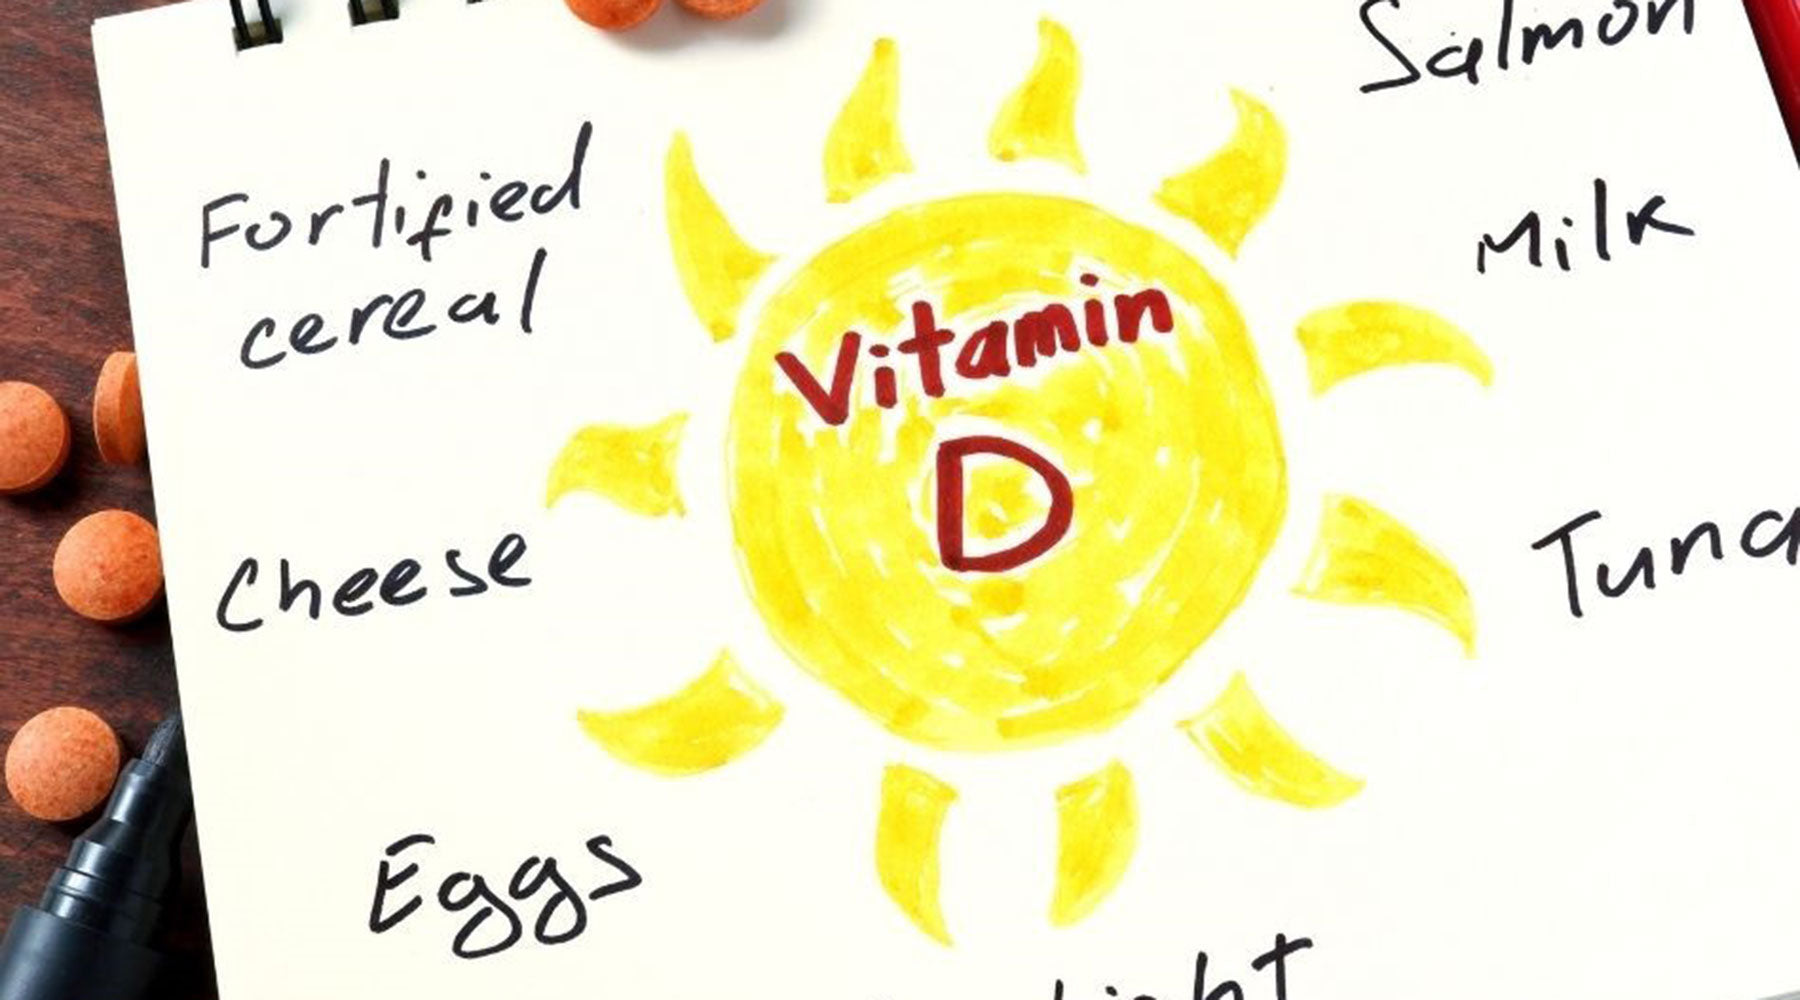 Why is everyone talking about Vitamin D?